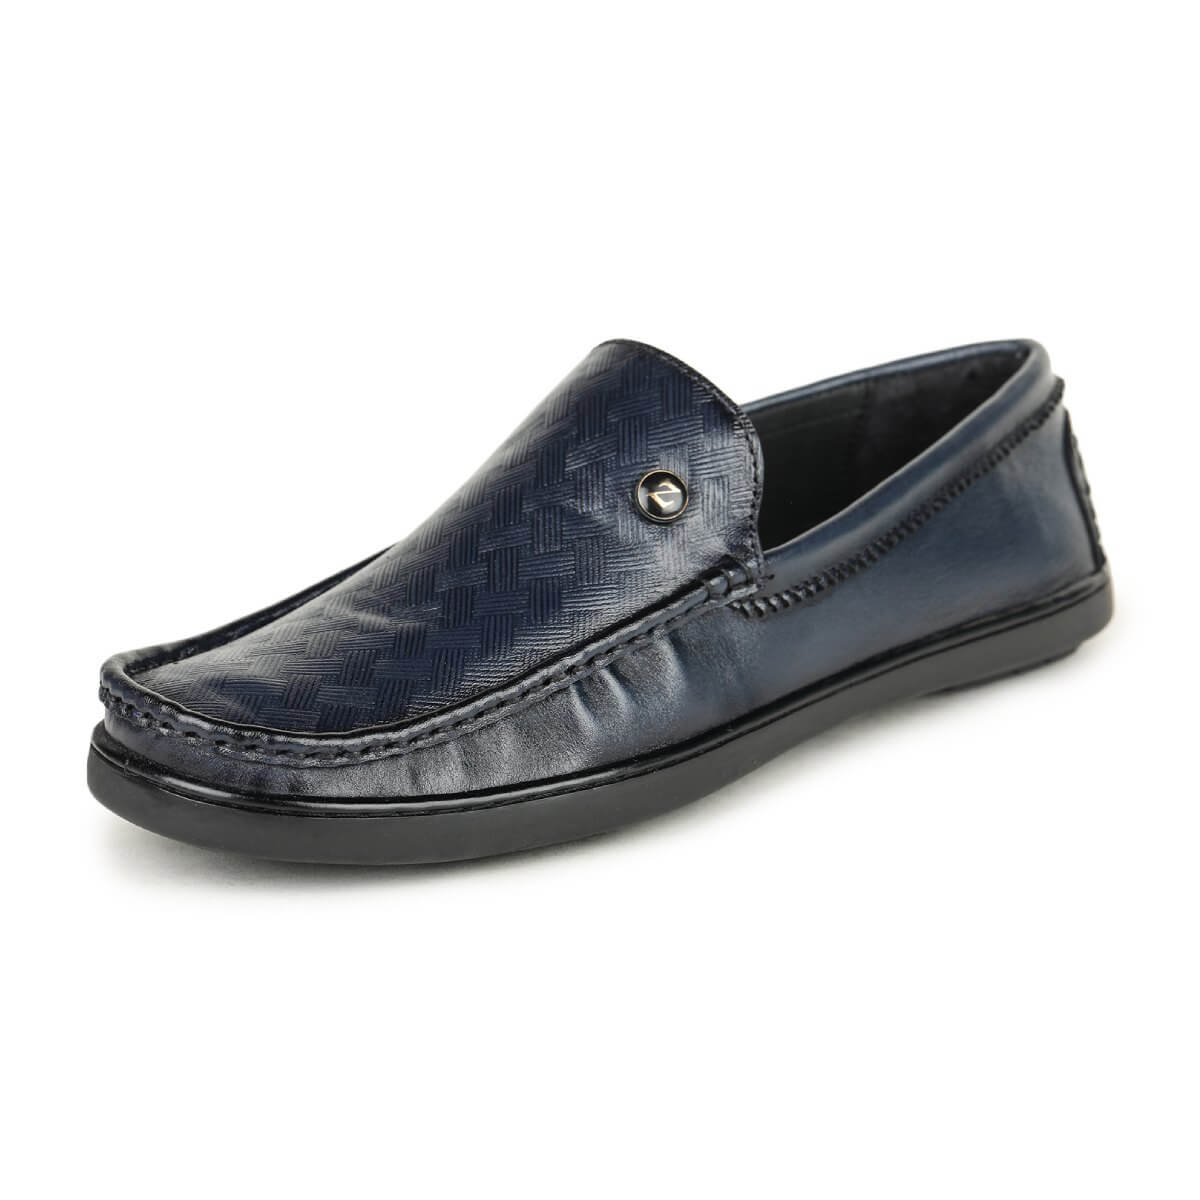 Mat Style Design Loafers blue7